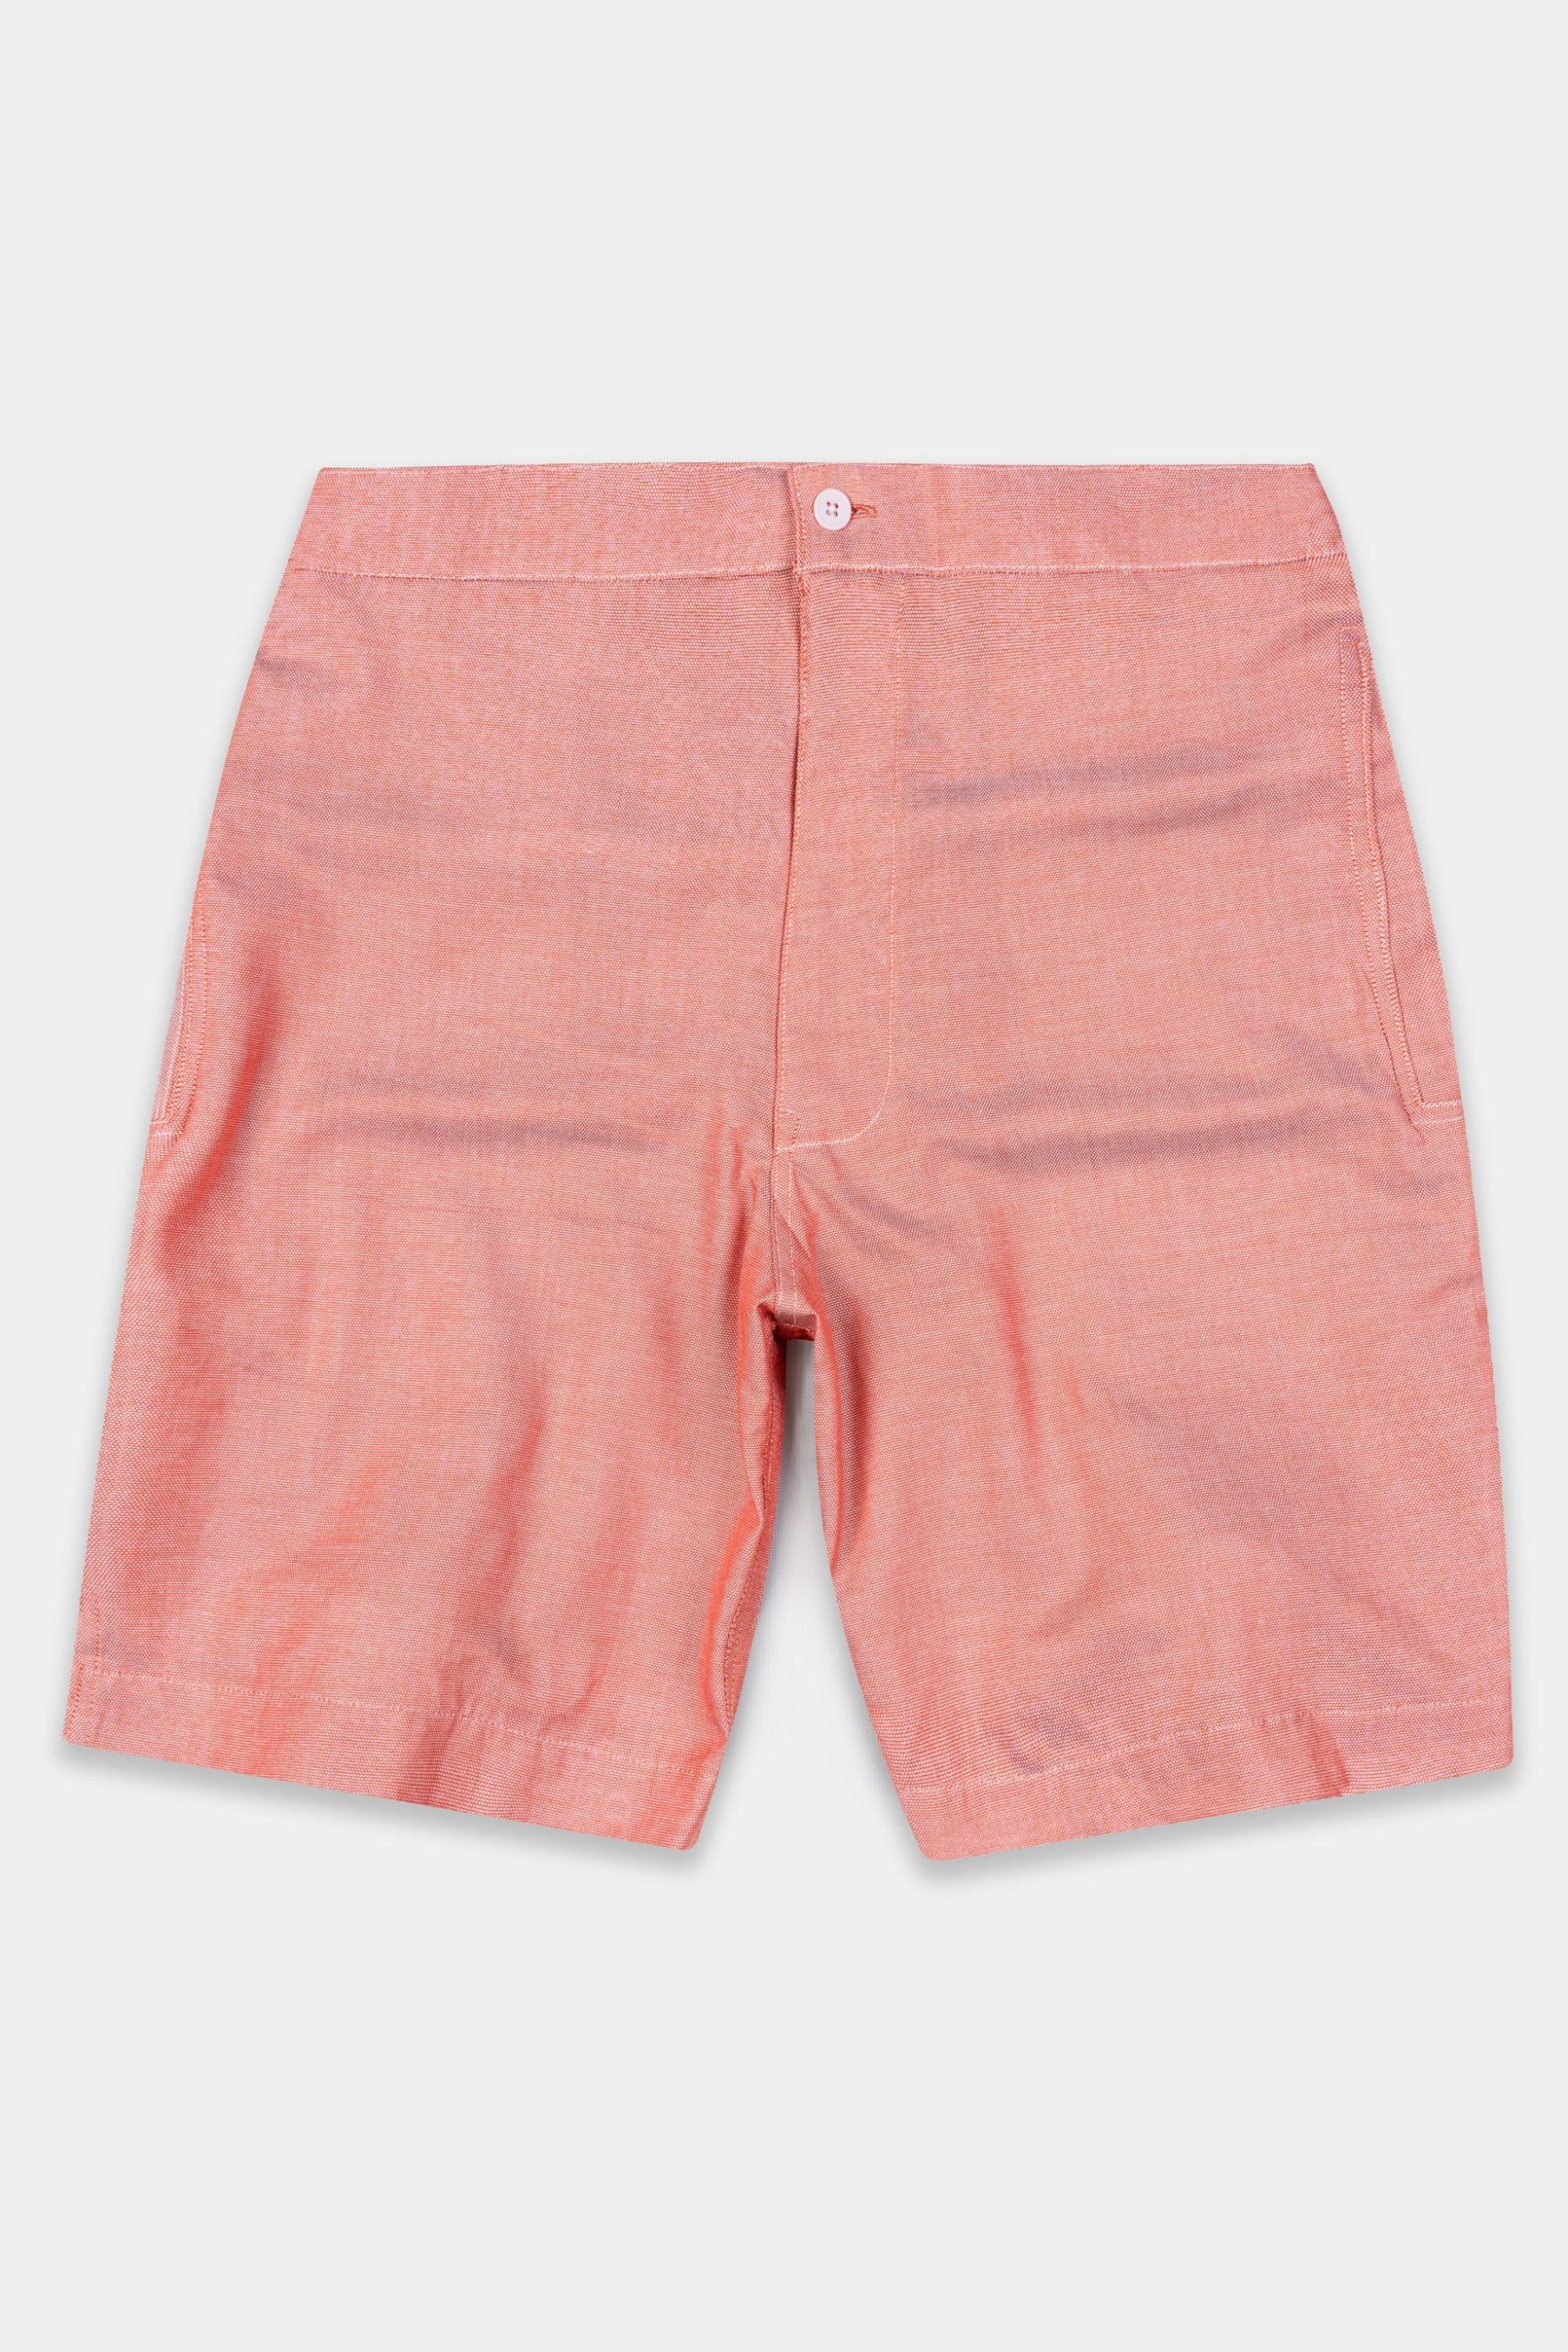 Men cotton shorts for Everyday Style and Versatility缩略图